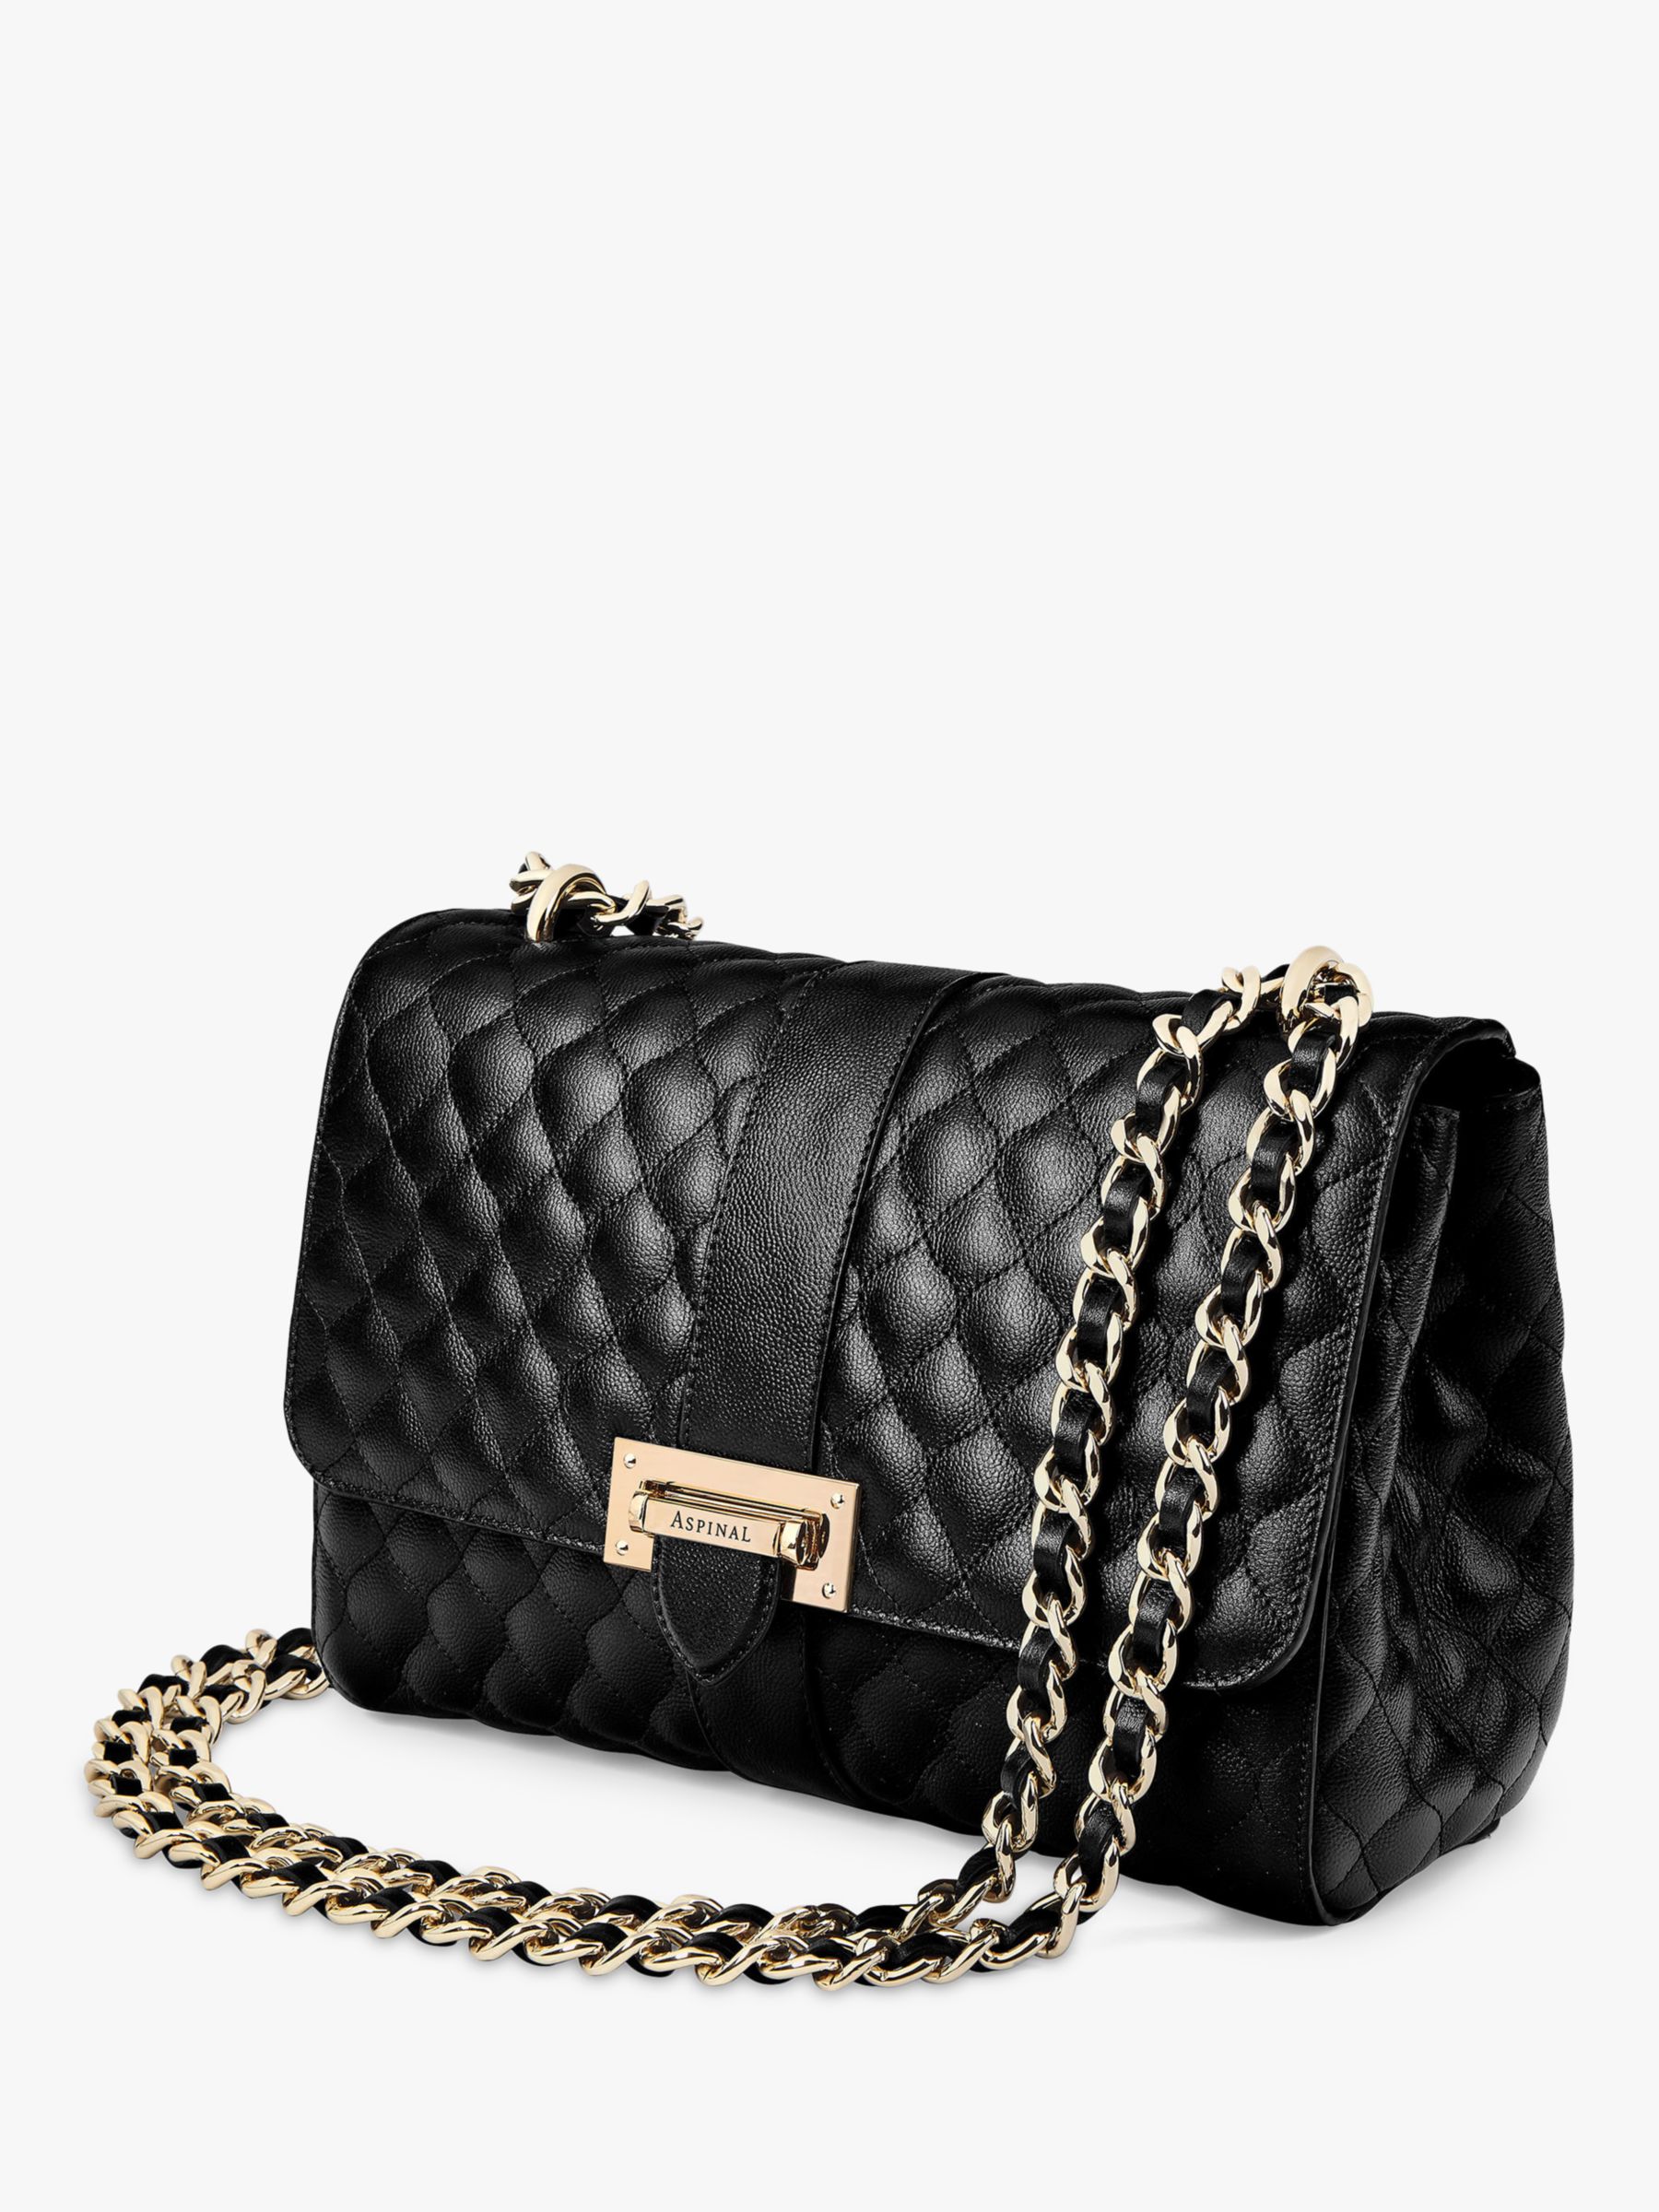 Aspinal of London Lottie Large Quilted Pebble Leather Shoulder Bag ...